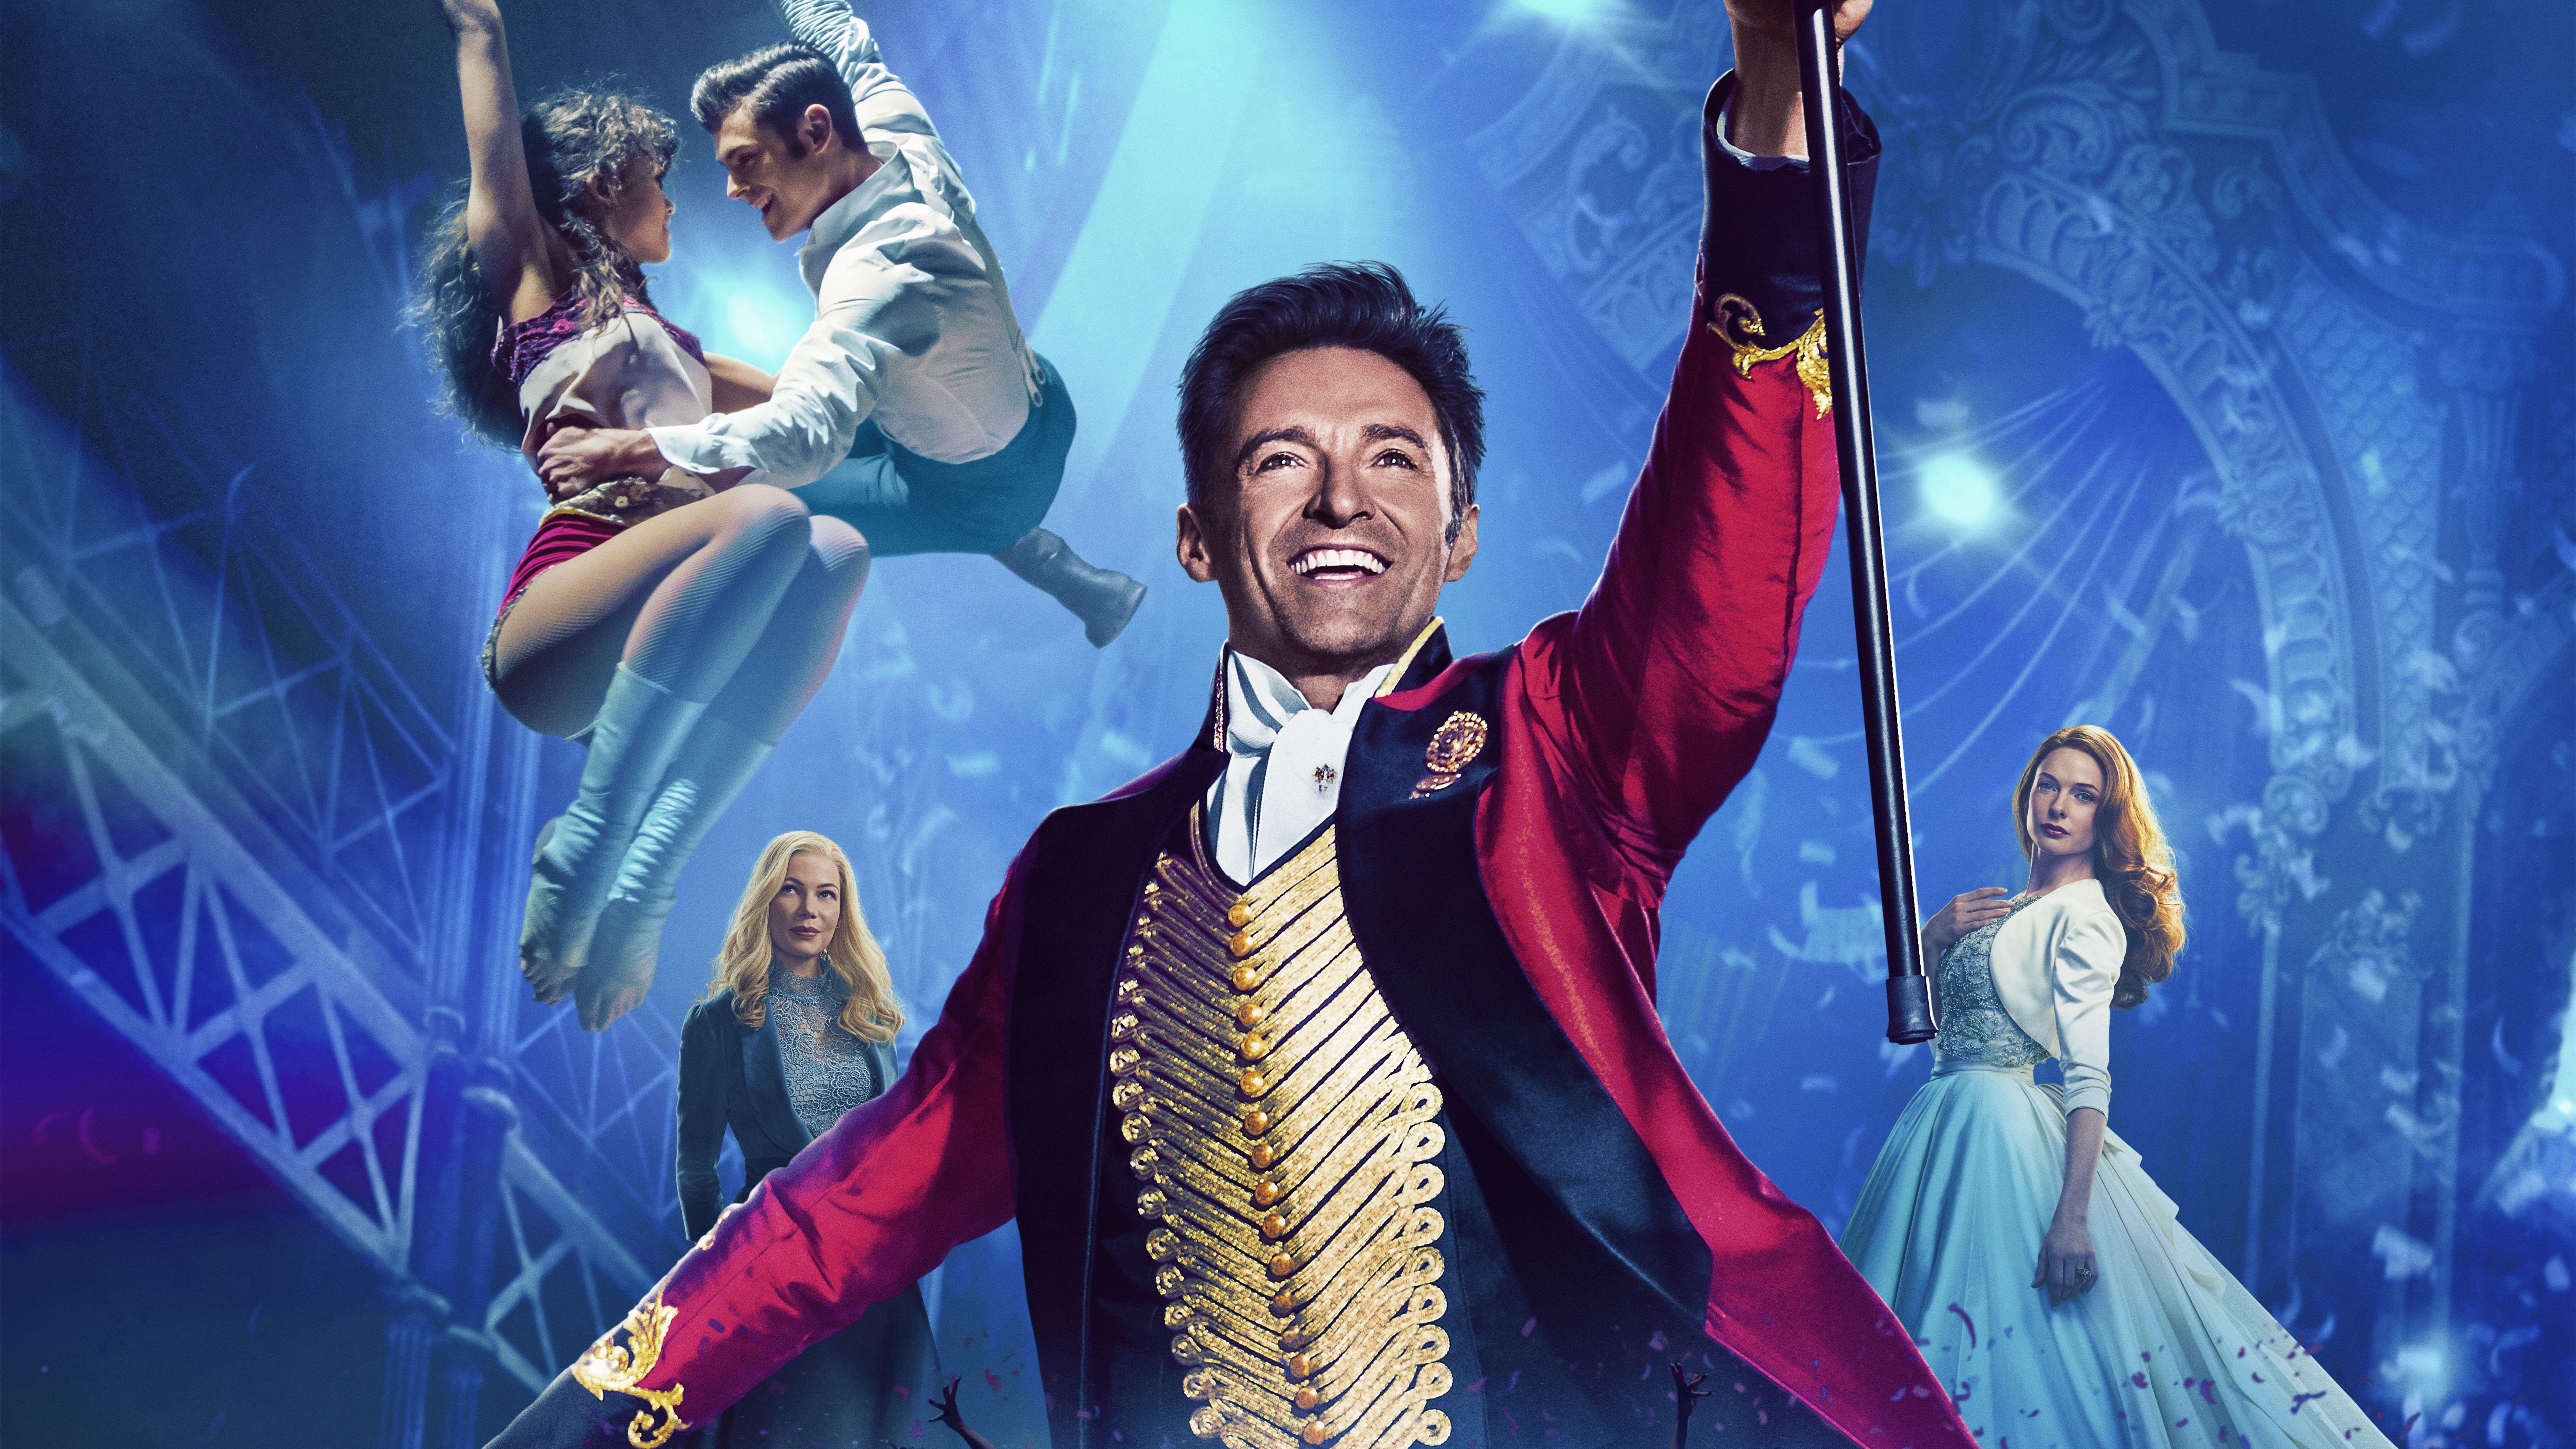 the greatest showman wallpaper. The Greatest Showman 2017